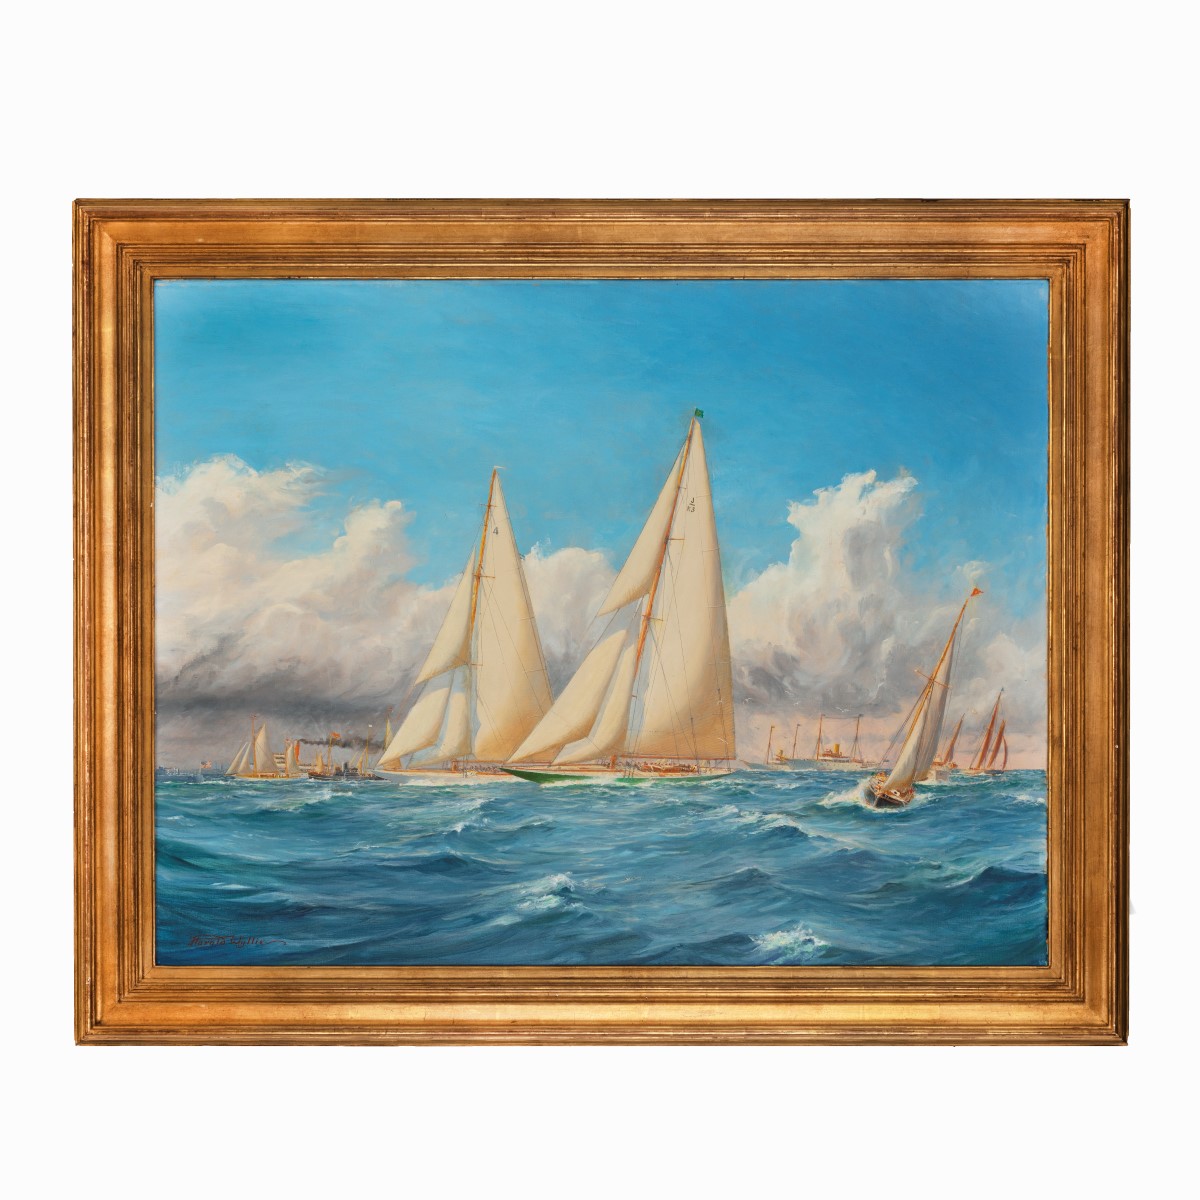 A rare painting by Harold Wyllie of 1930 America’s Cup racing off Newport, Rhode Island